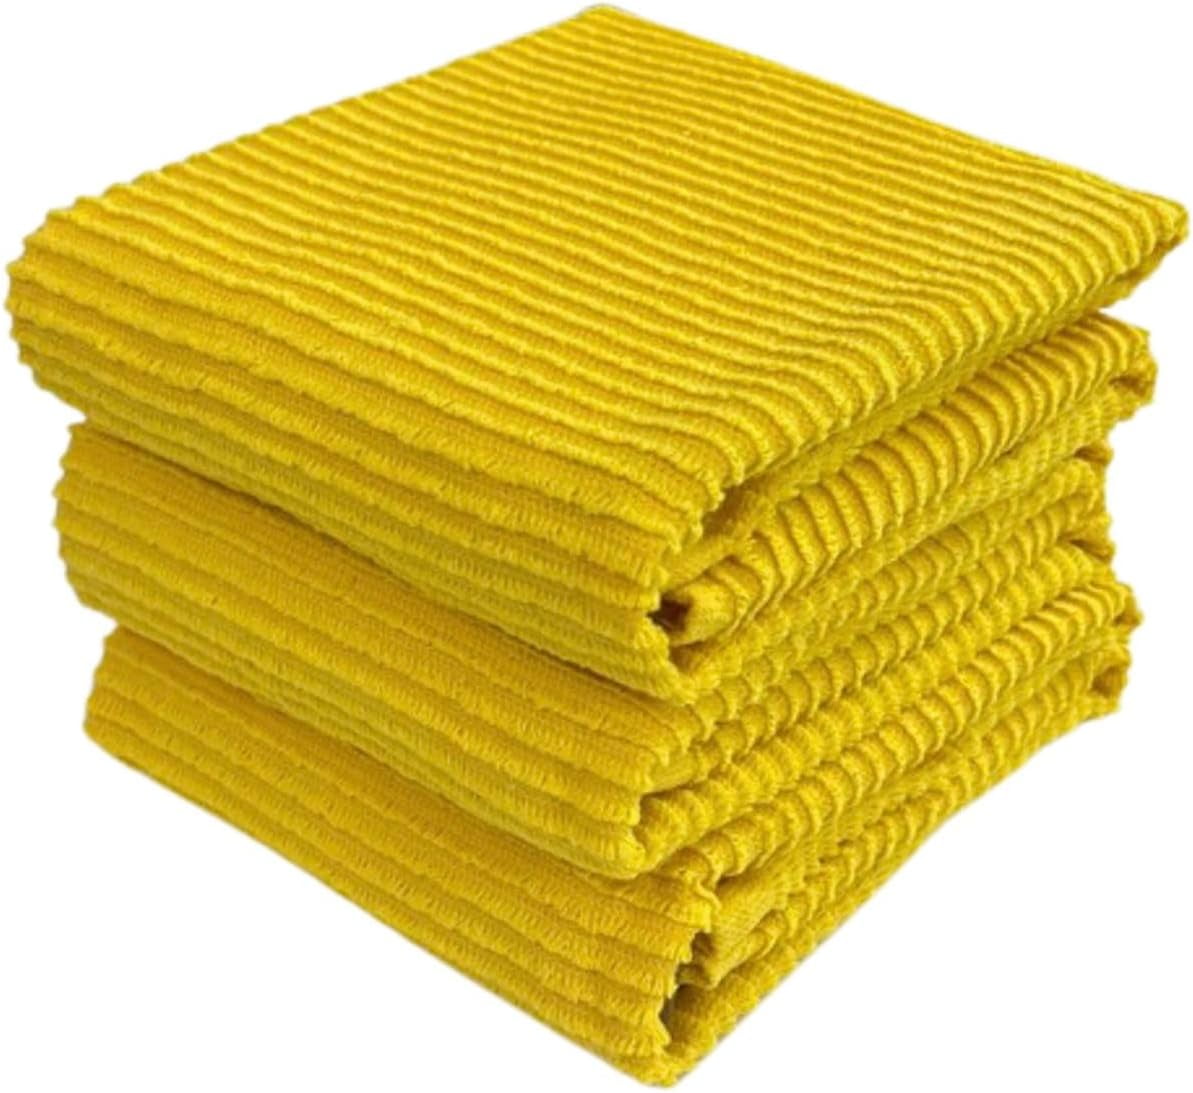 Home kitchen towel set Yellow And Blue. Thick Material Beautiful Brand New  Set